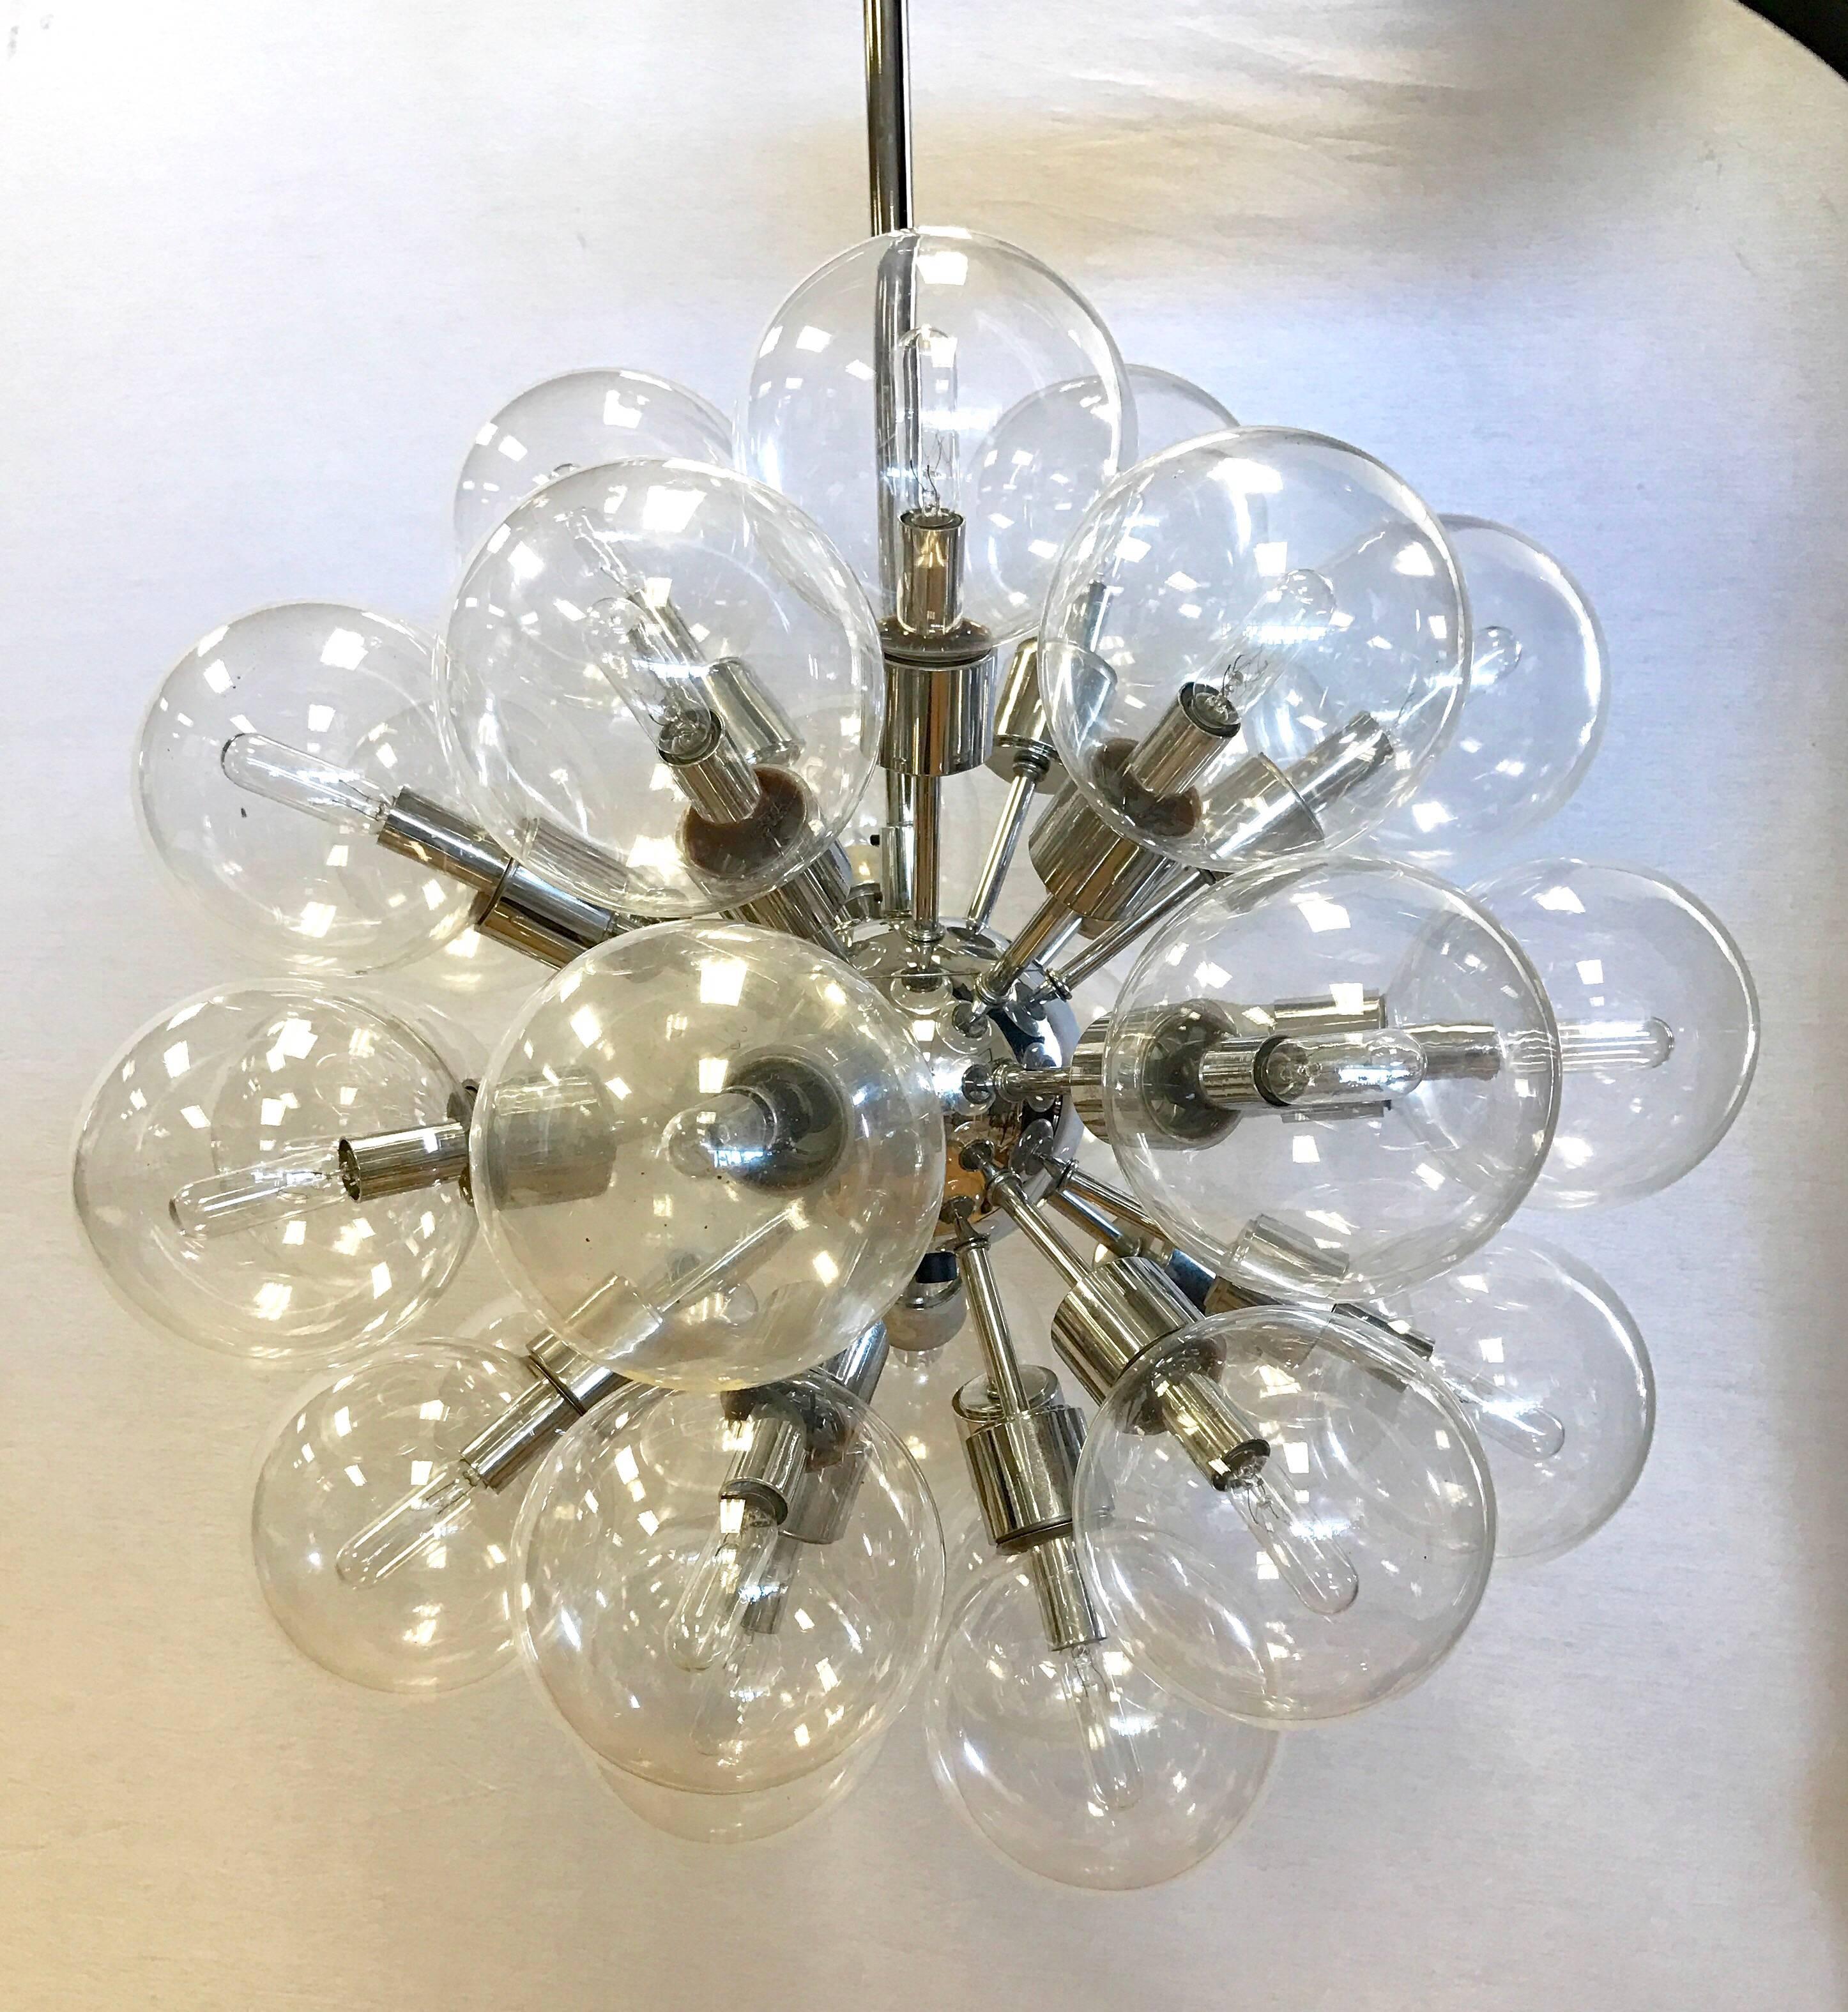 Coveted pair of matching Mid-Century Modern Lightolier 30-light sputnik chandeliers, circa 1960s. Each features thirty original glass globes on polished chrome spokes radiating from a central chrome nucleus. They are made of polished chrome and have